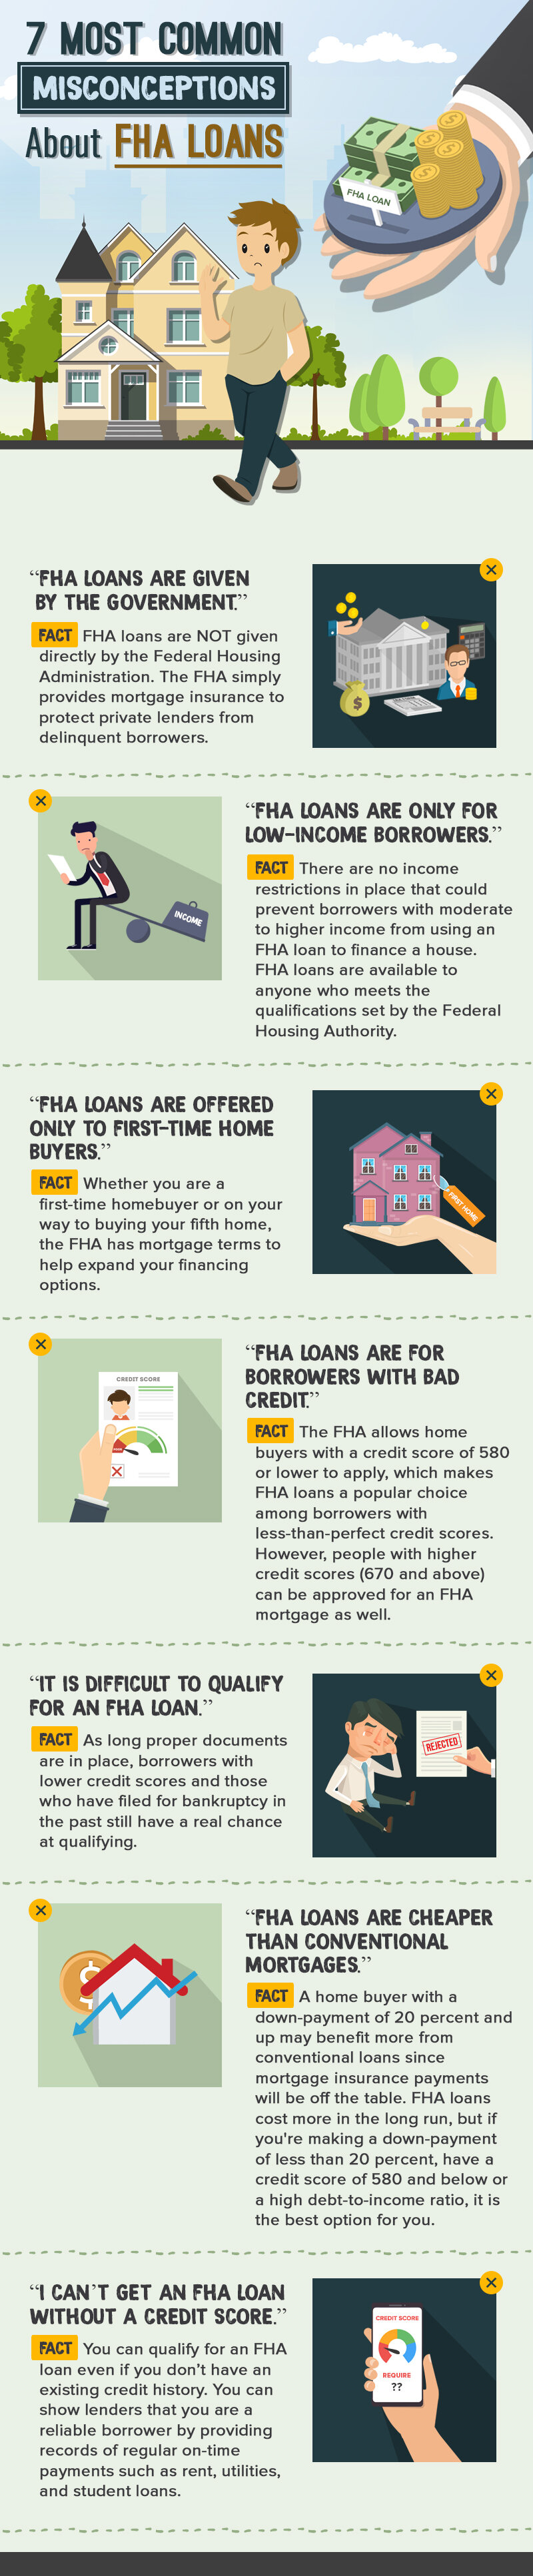 7 Misconceptions That Hinder People From Getting An FHA Loan